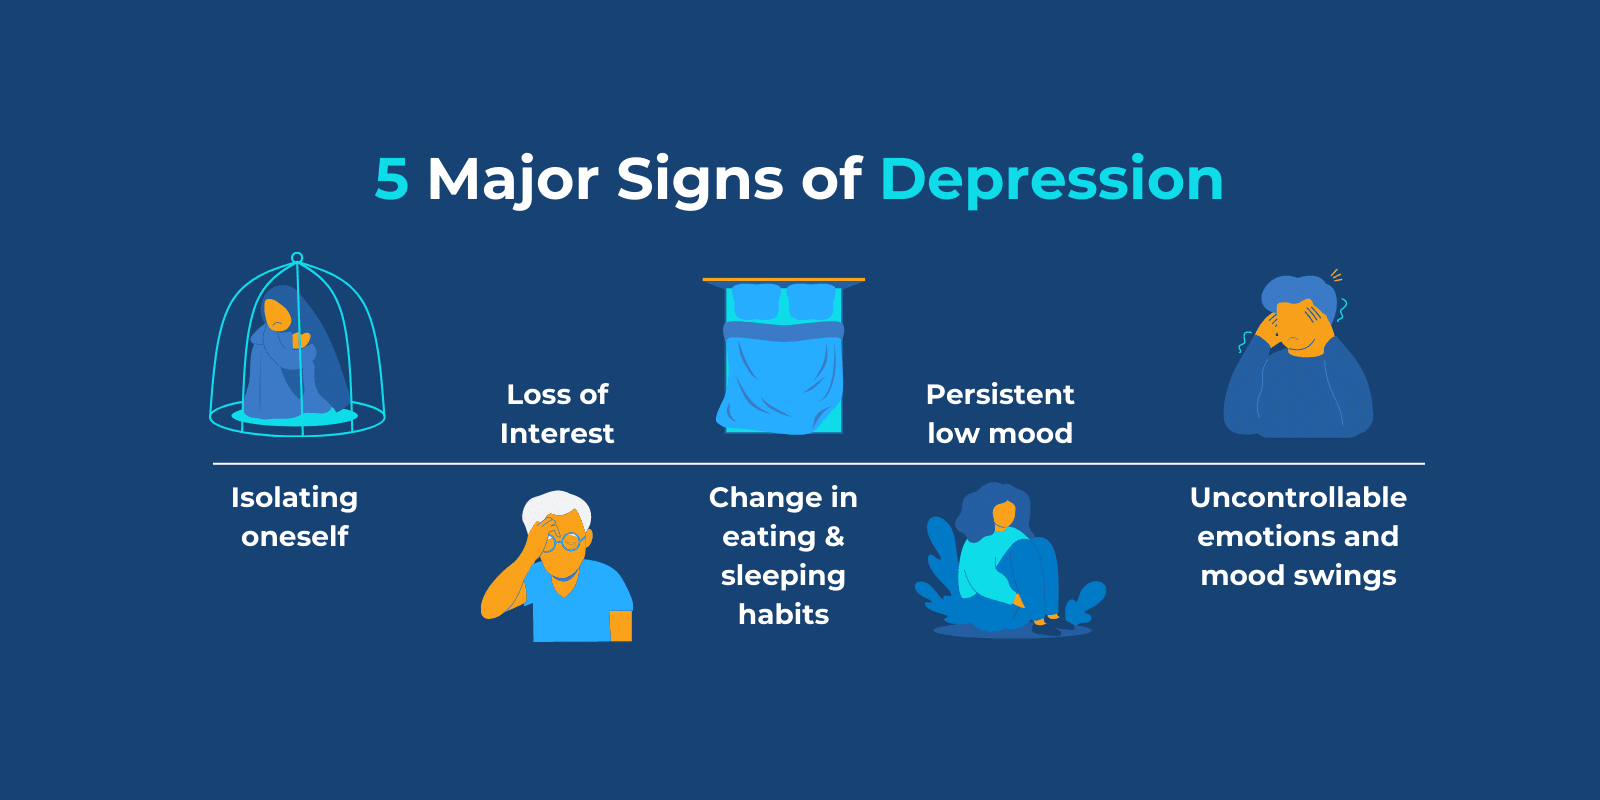 "5 Major Signs Of Depression" text written above list of signs represented with relevant graphics